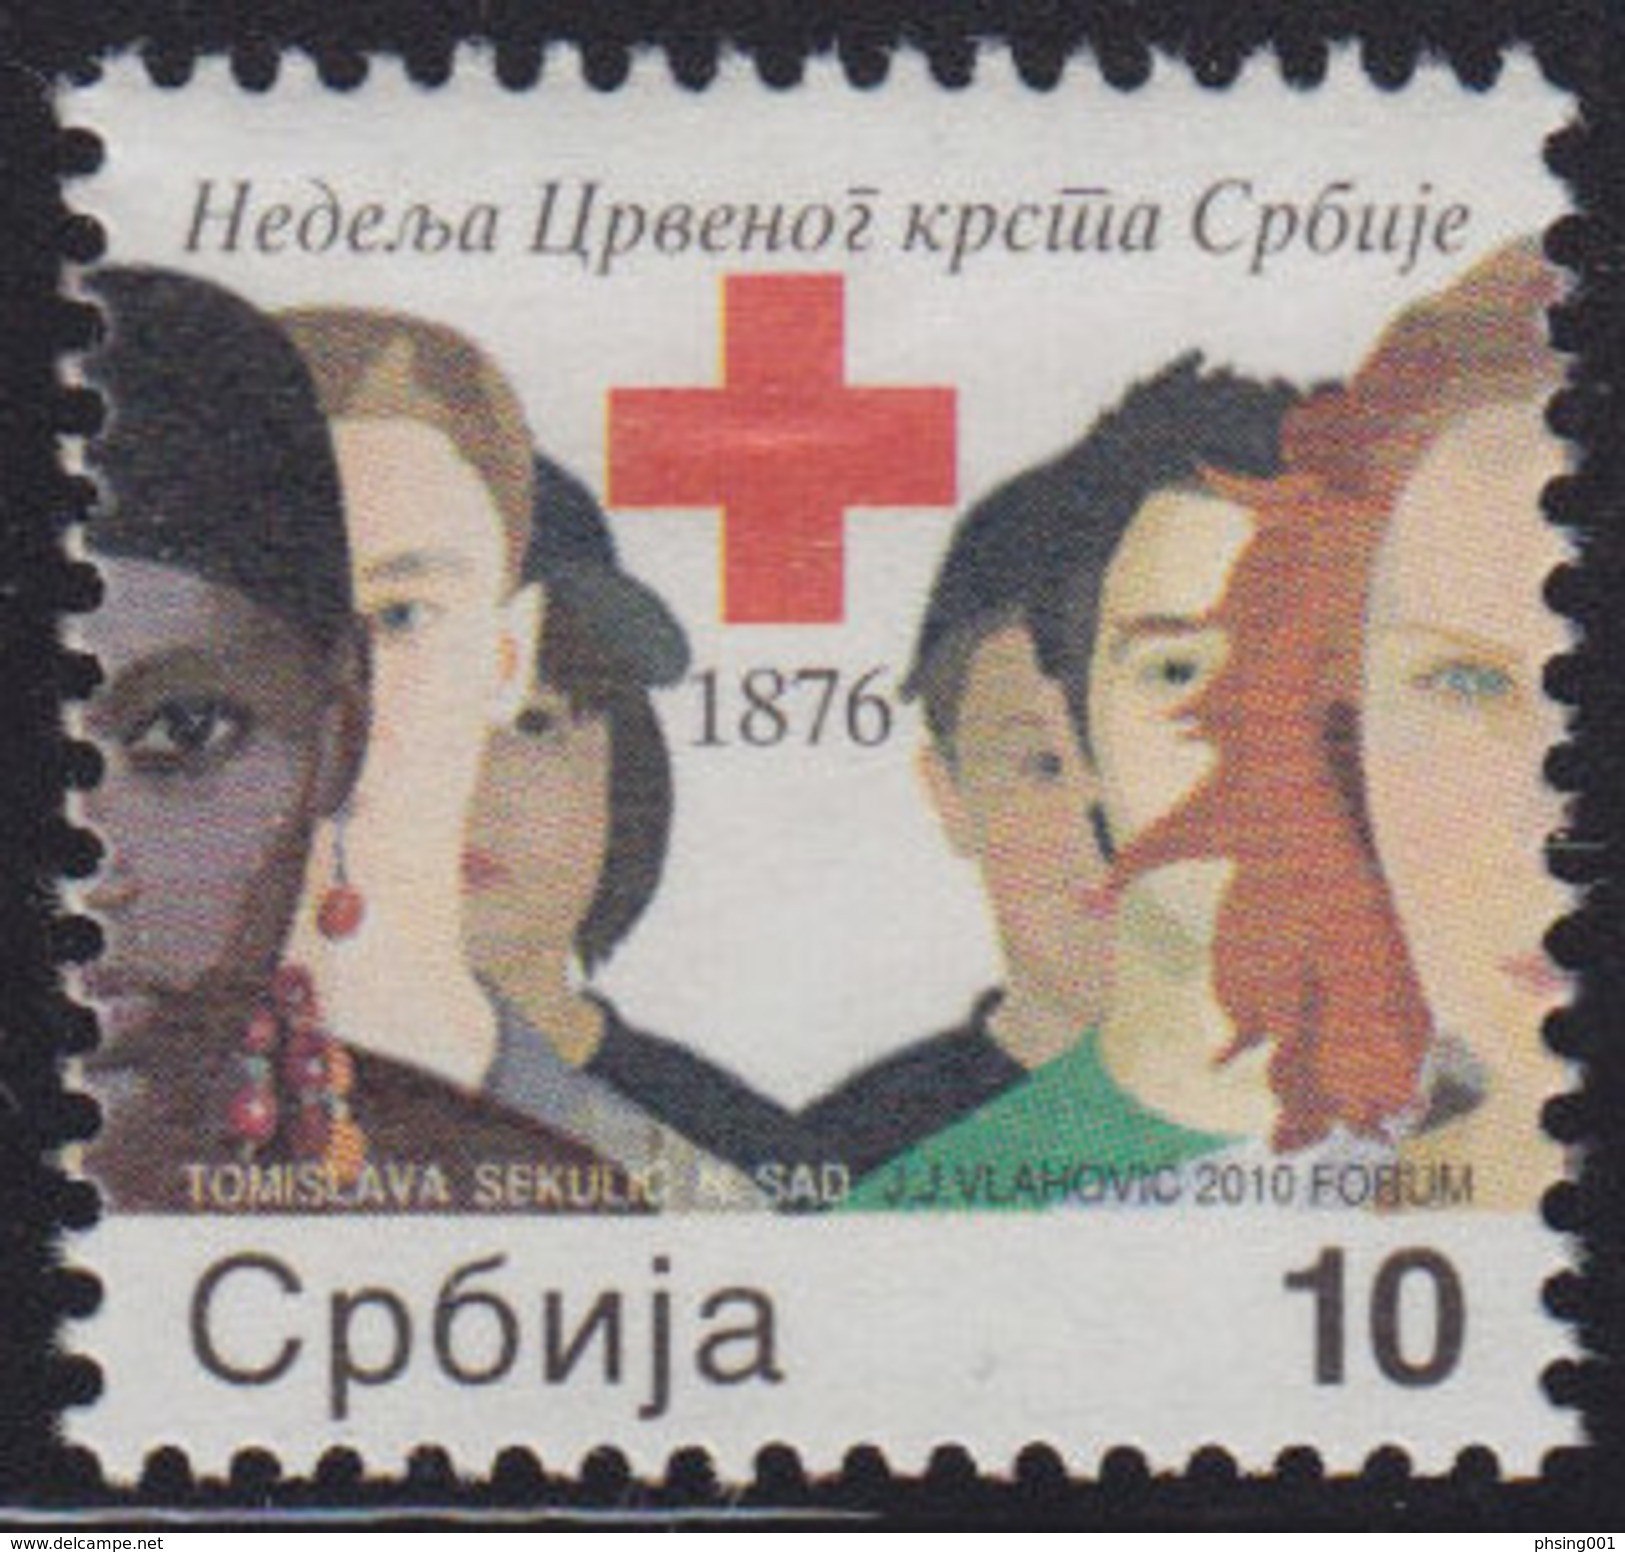 Serbia 2010 Red Cross Rotes Kreuz Croix Rouge, Tax, Charity, Surcharge Stamp MNH - Serbia